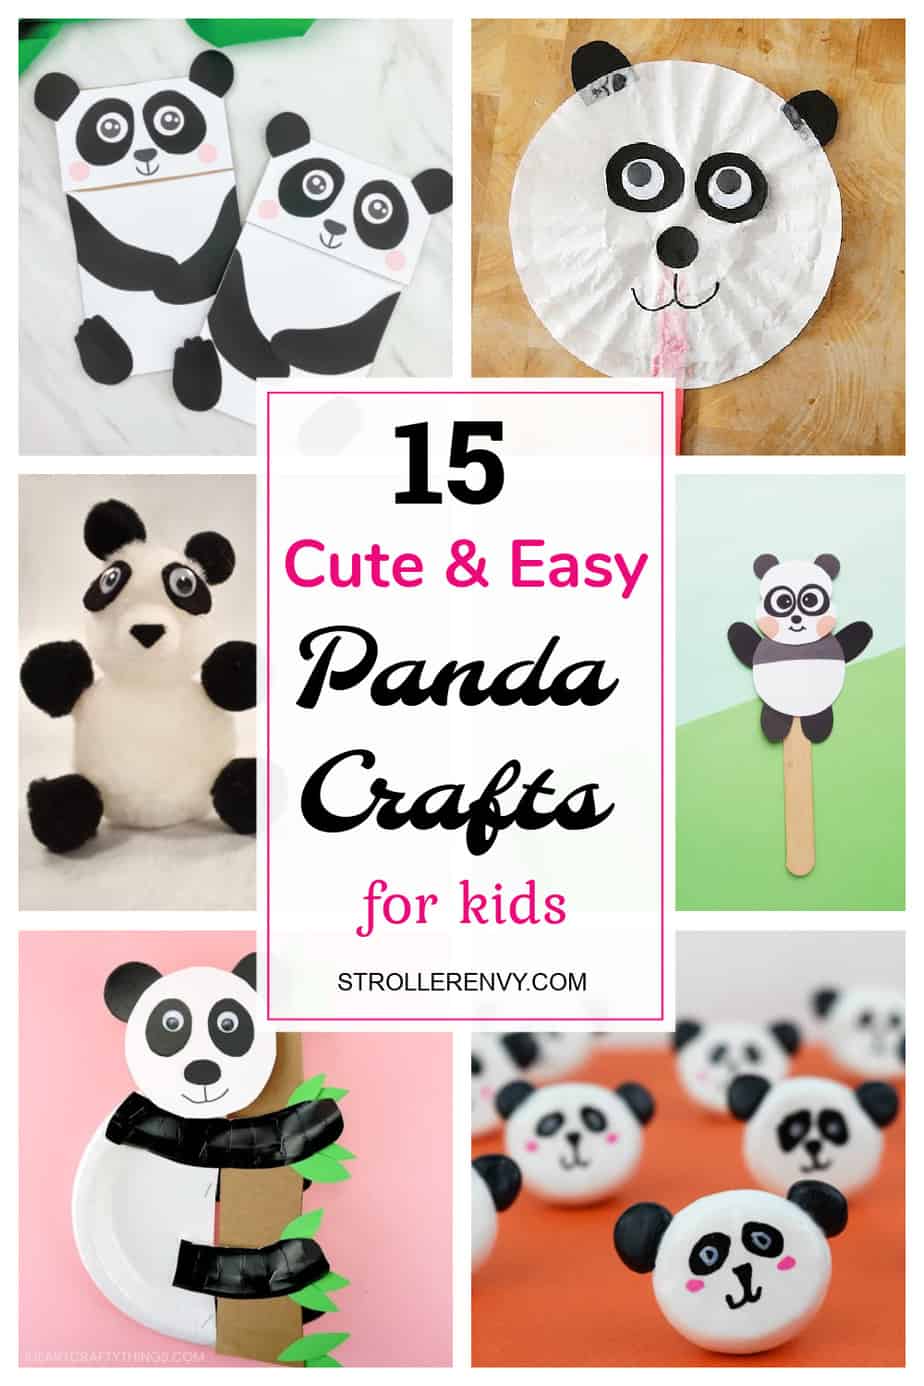 15 Cute & Easy Panda Crafts for Kids they are Sure to Love